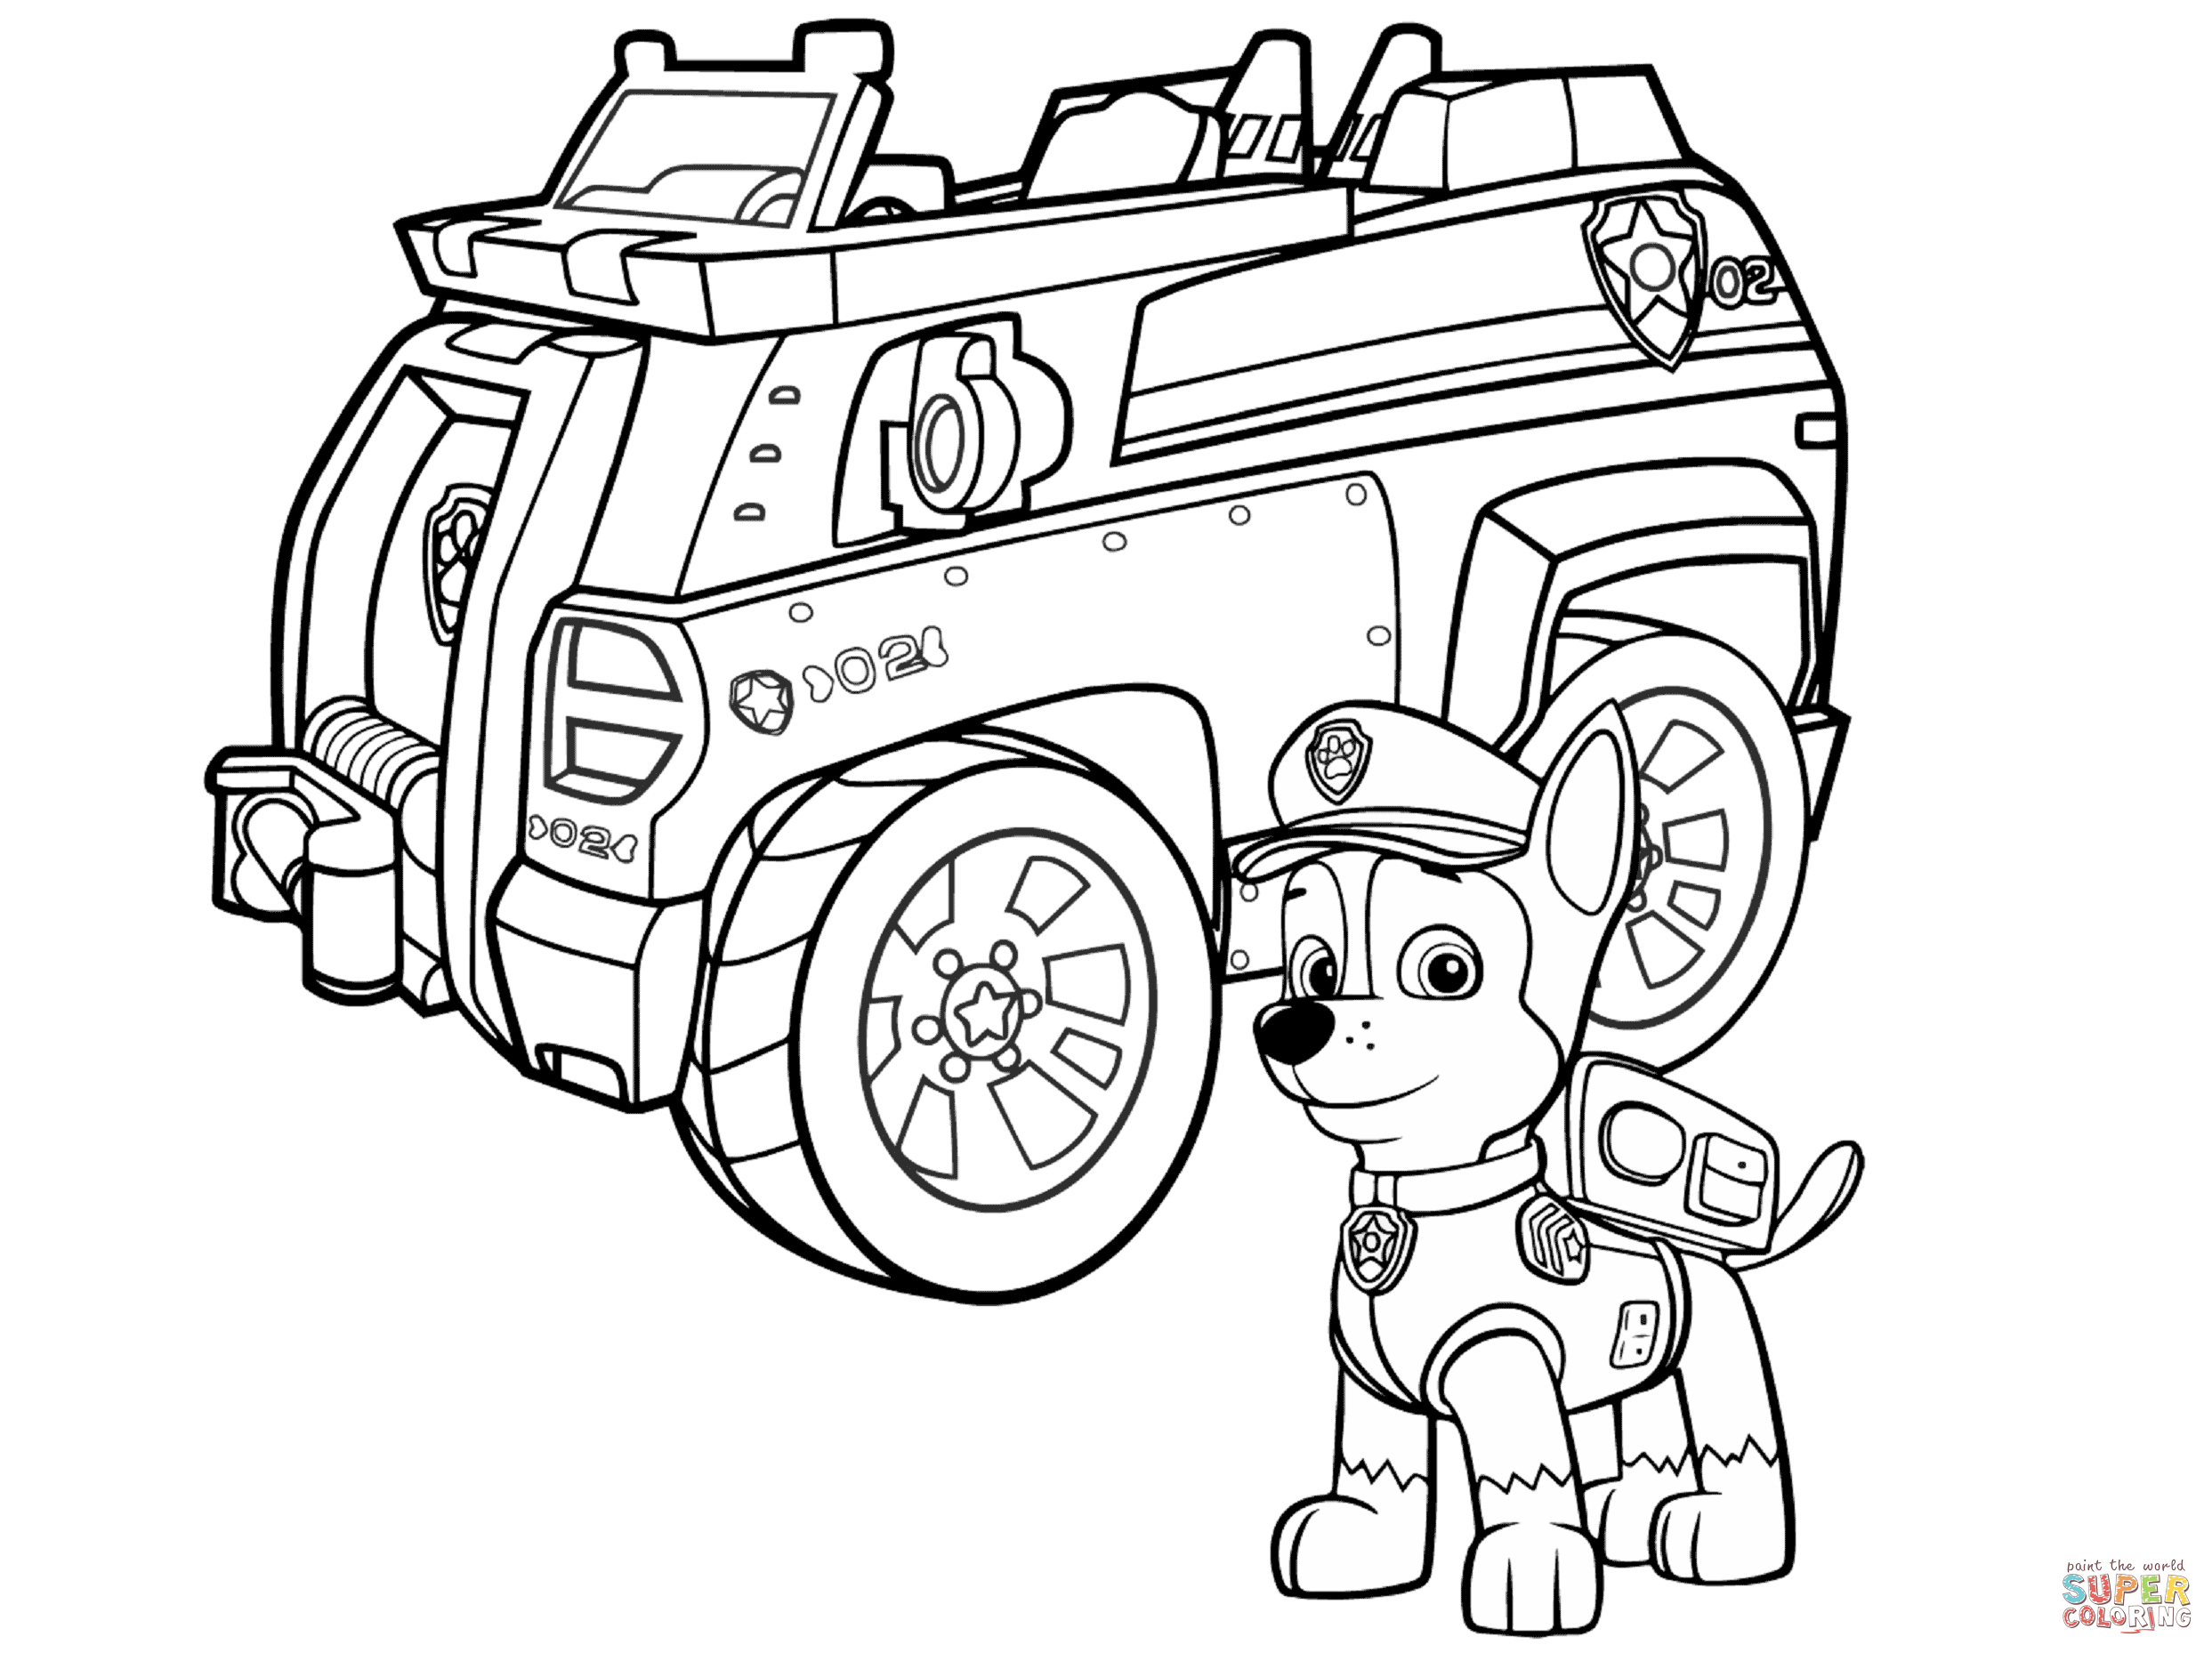 Paw Patrol Coloring Pages | Free Coloring Pages - Free Printable Paw Patrol Coloring Pages